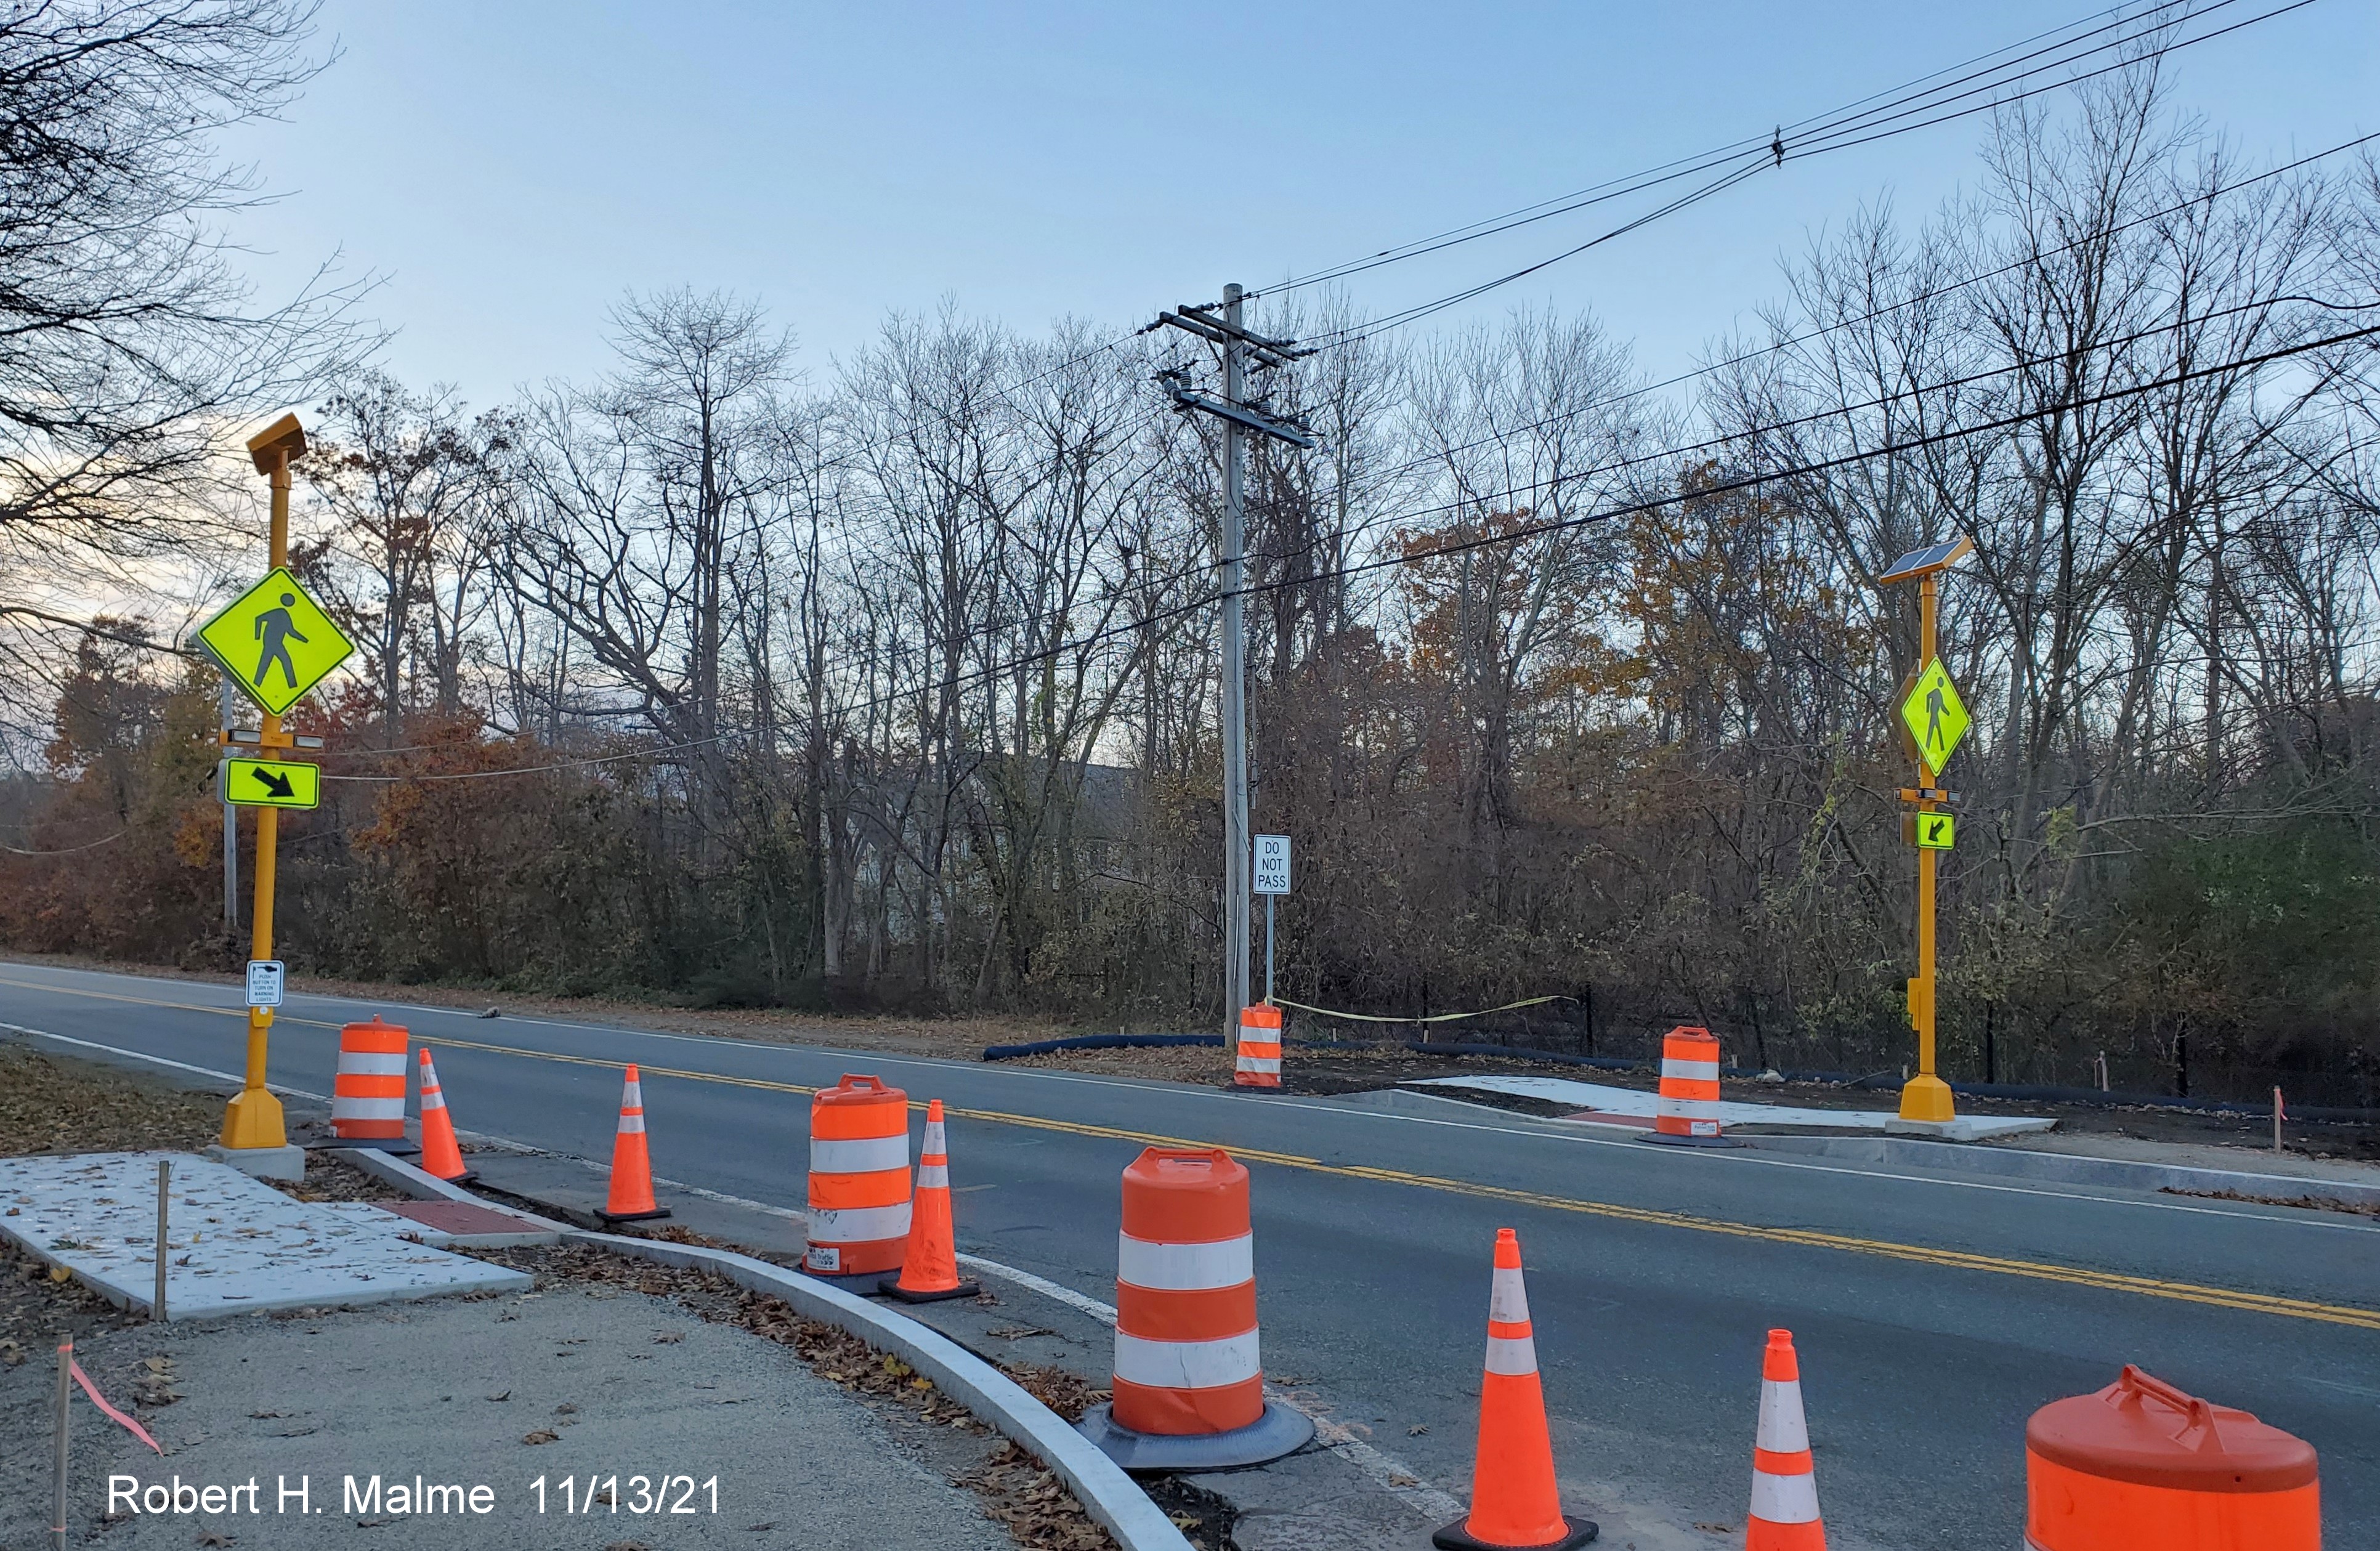 Image of new pedestrian signals installed at future crosswalk at intersection of Kilby Street and Chief Justice Cushing Highway (MA 3A) in Hingham, November 2021